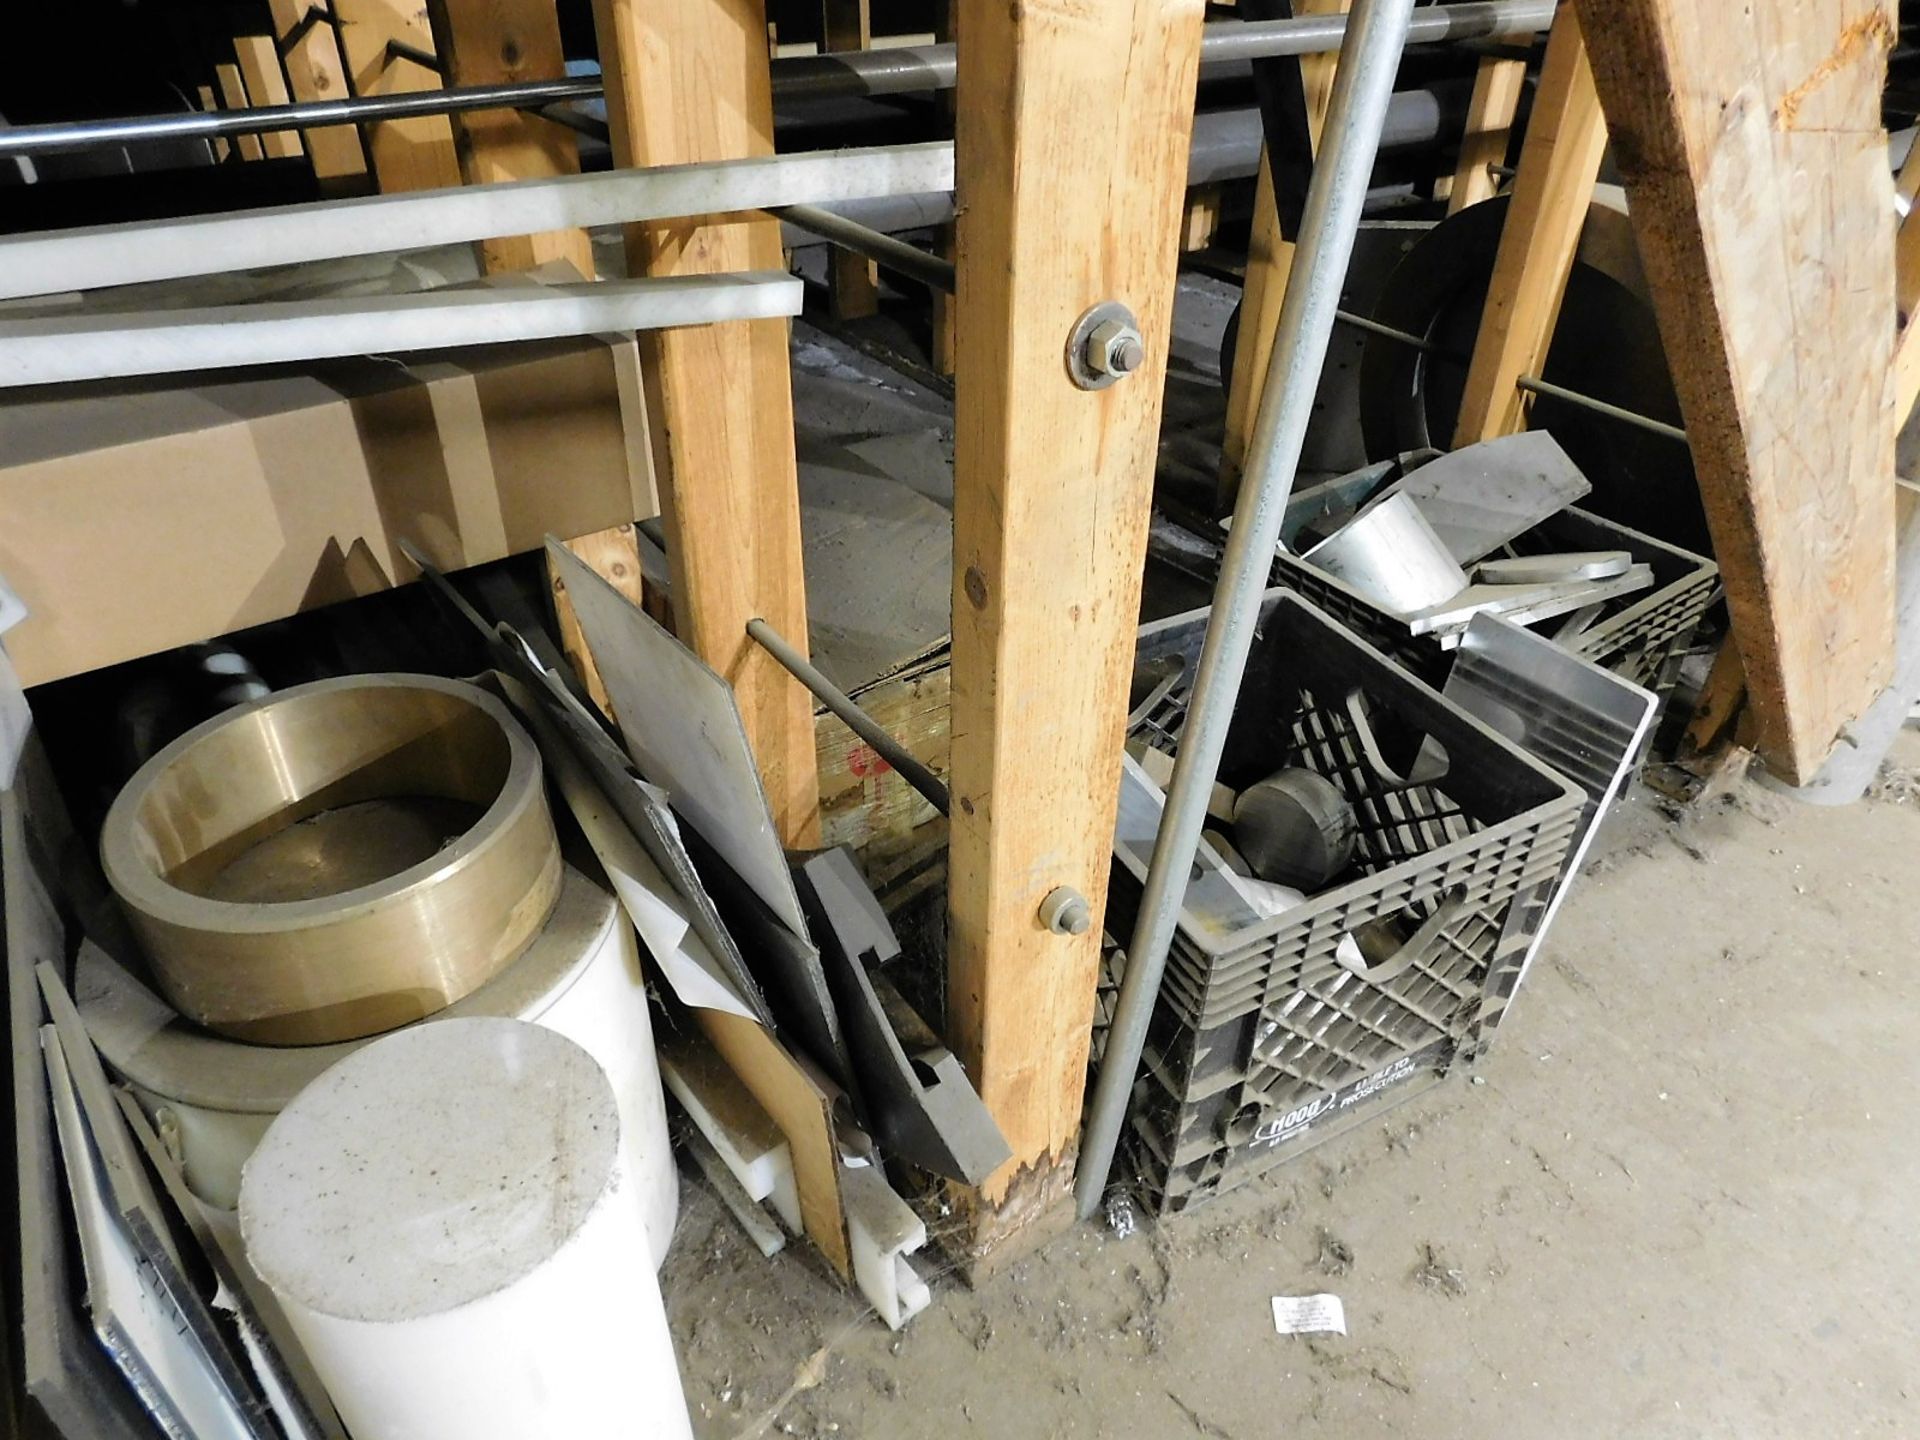 LOT - ENORMOUS QUANTITY OF USEABLE MATERIAL, WITH OR WITHOUT BOLT-TOGETHER RACK. MATERIAL INCLUDES - Image 11 of 12